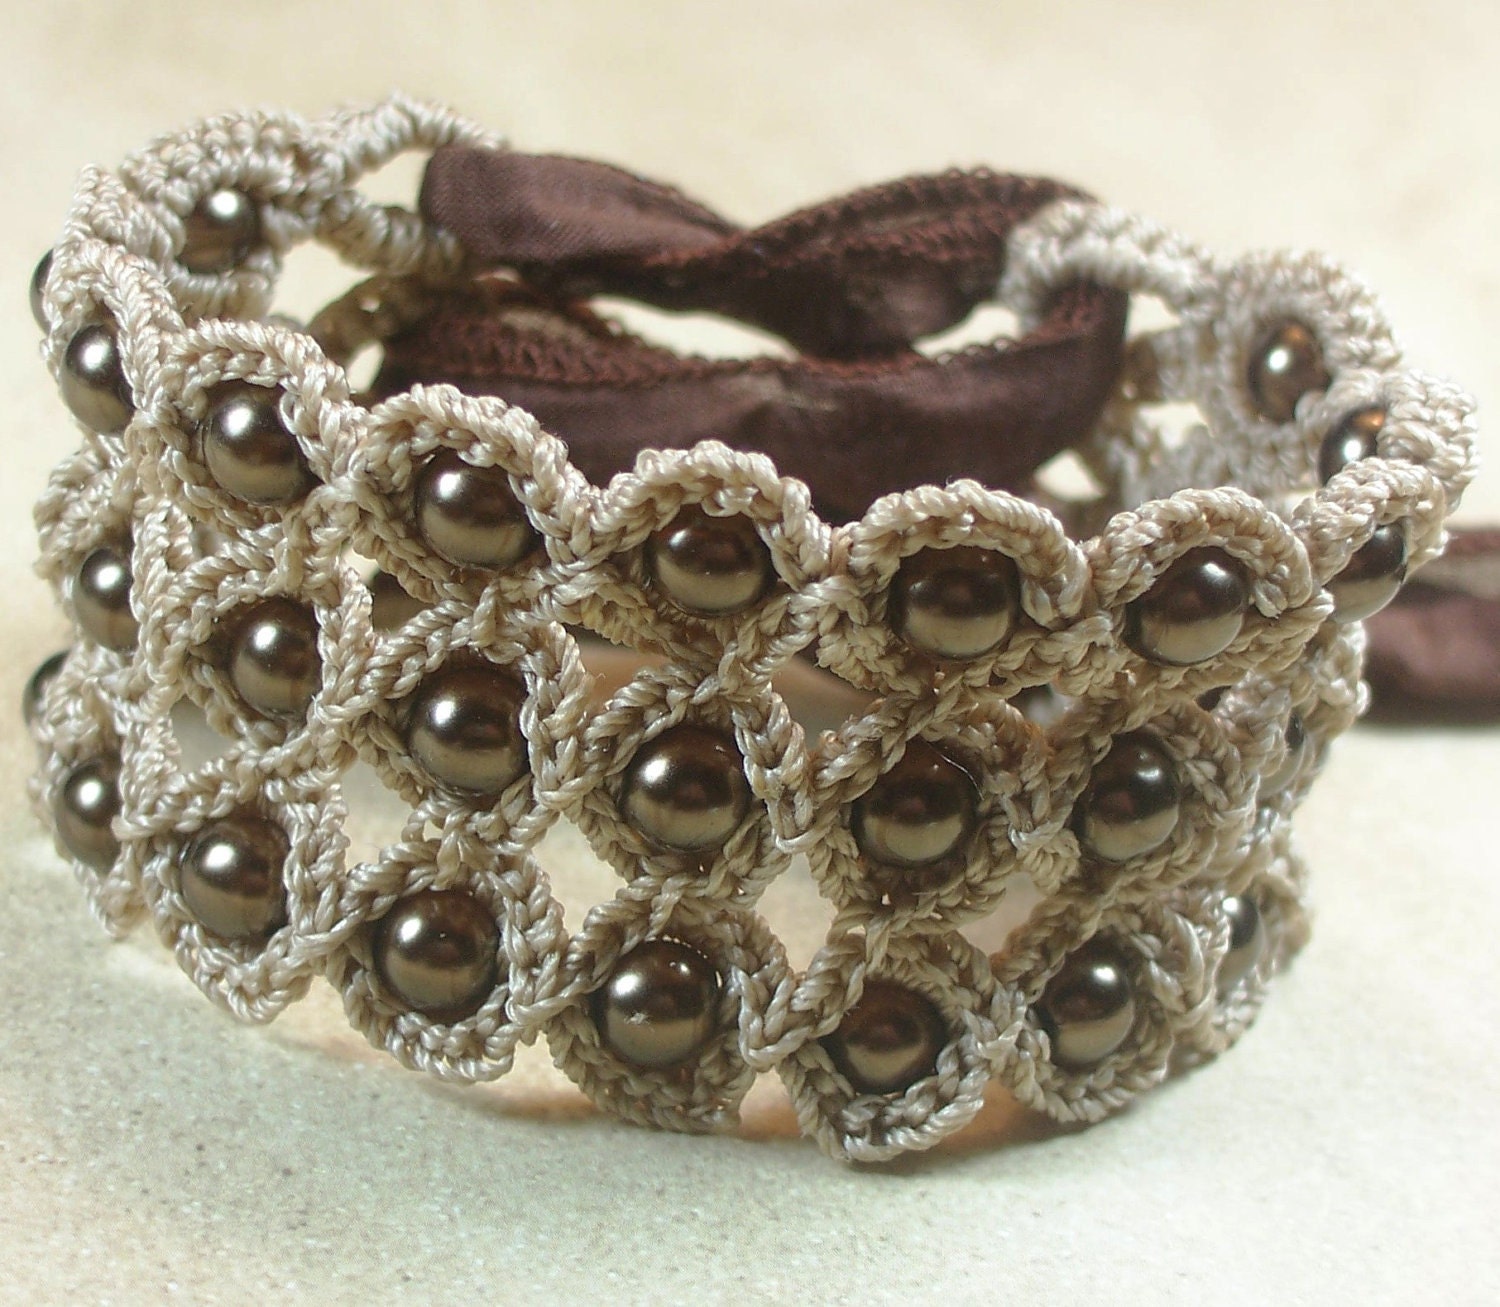 Crochet Jewelry, Bohemian Bracelet or Cuff, Natural brown shades - adjustable